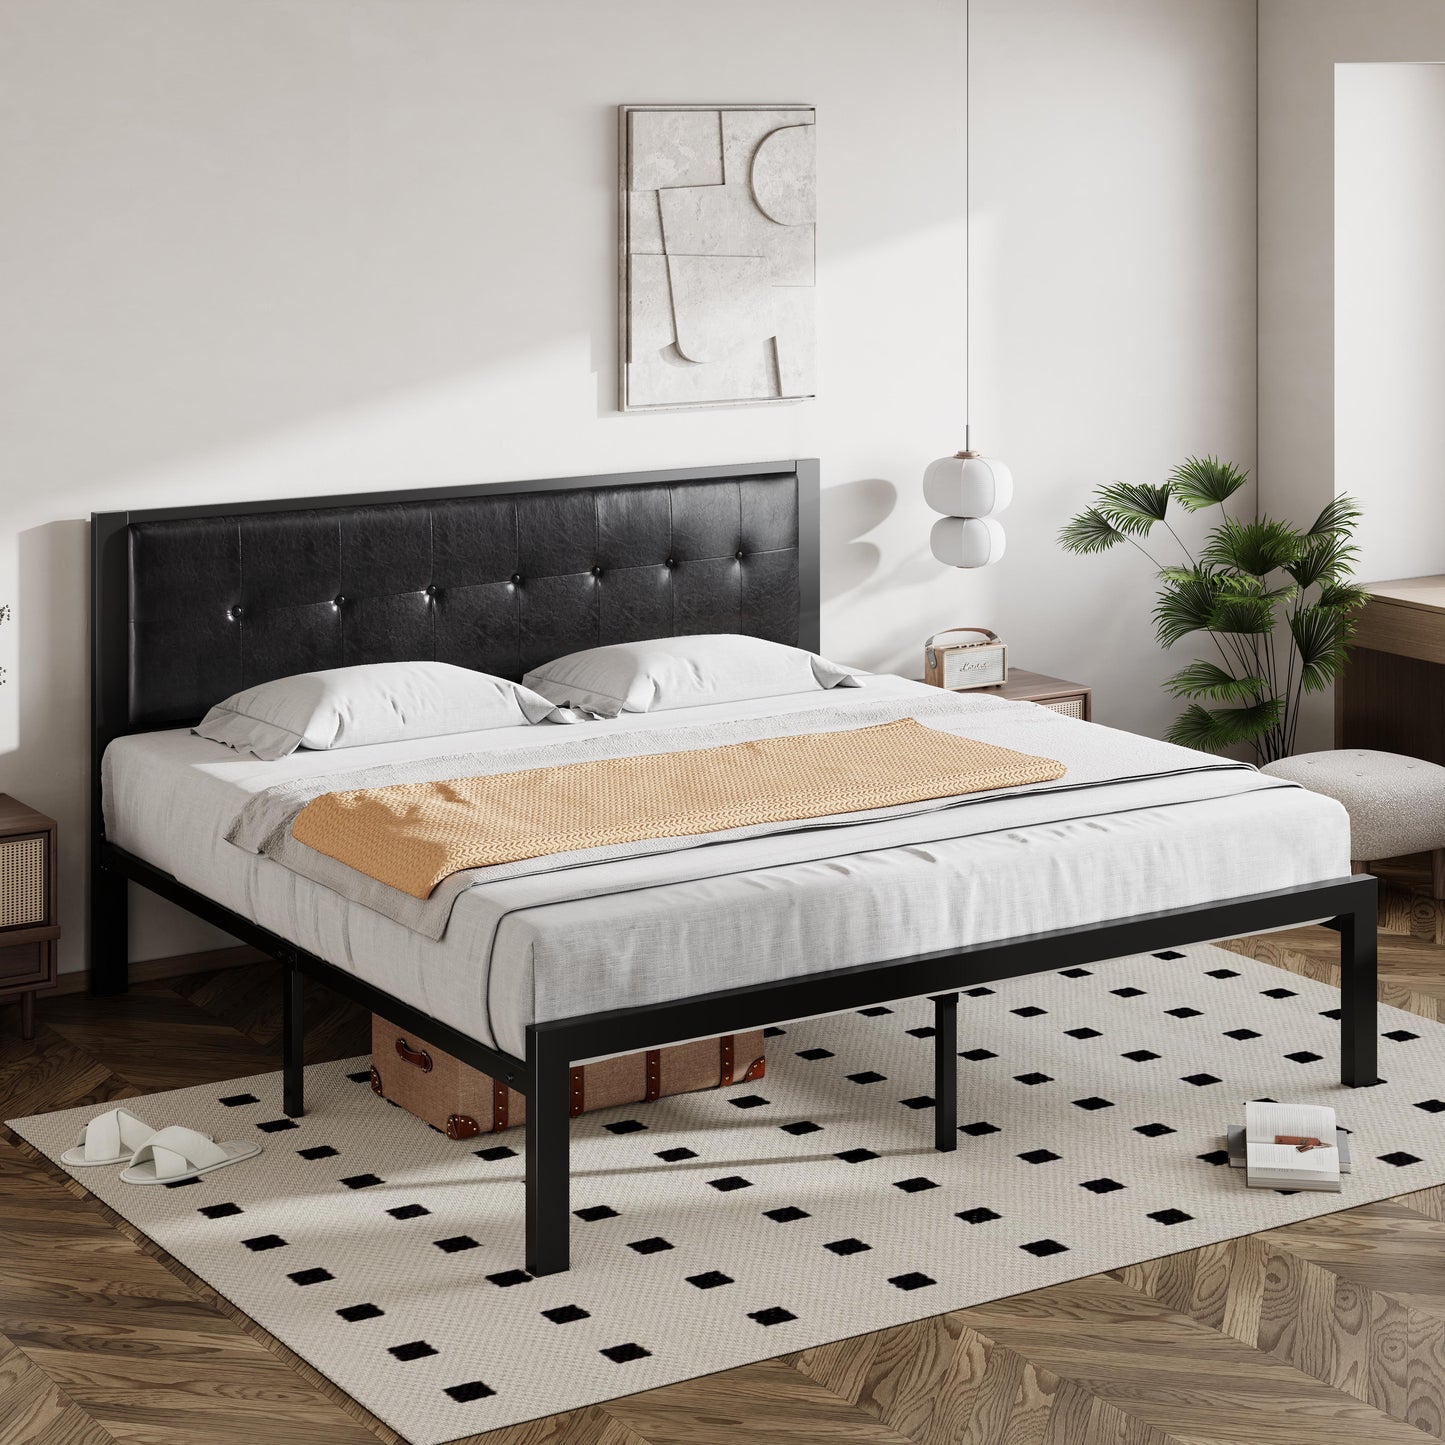 Allewie Faux Leather Platform Bed Frame Button Tufted Square Stitched Headboard, Black